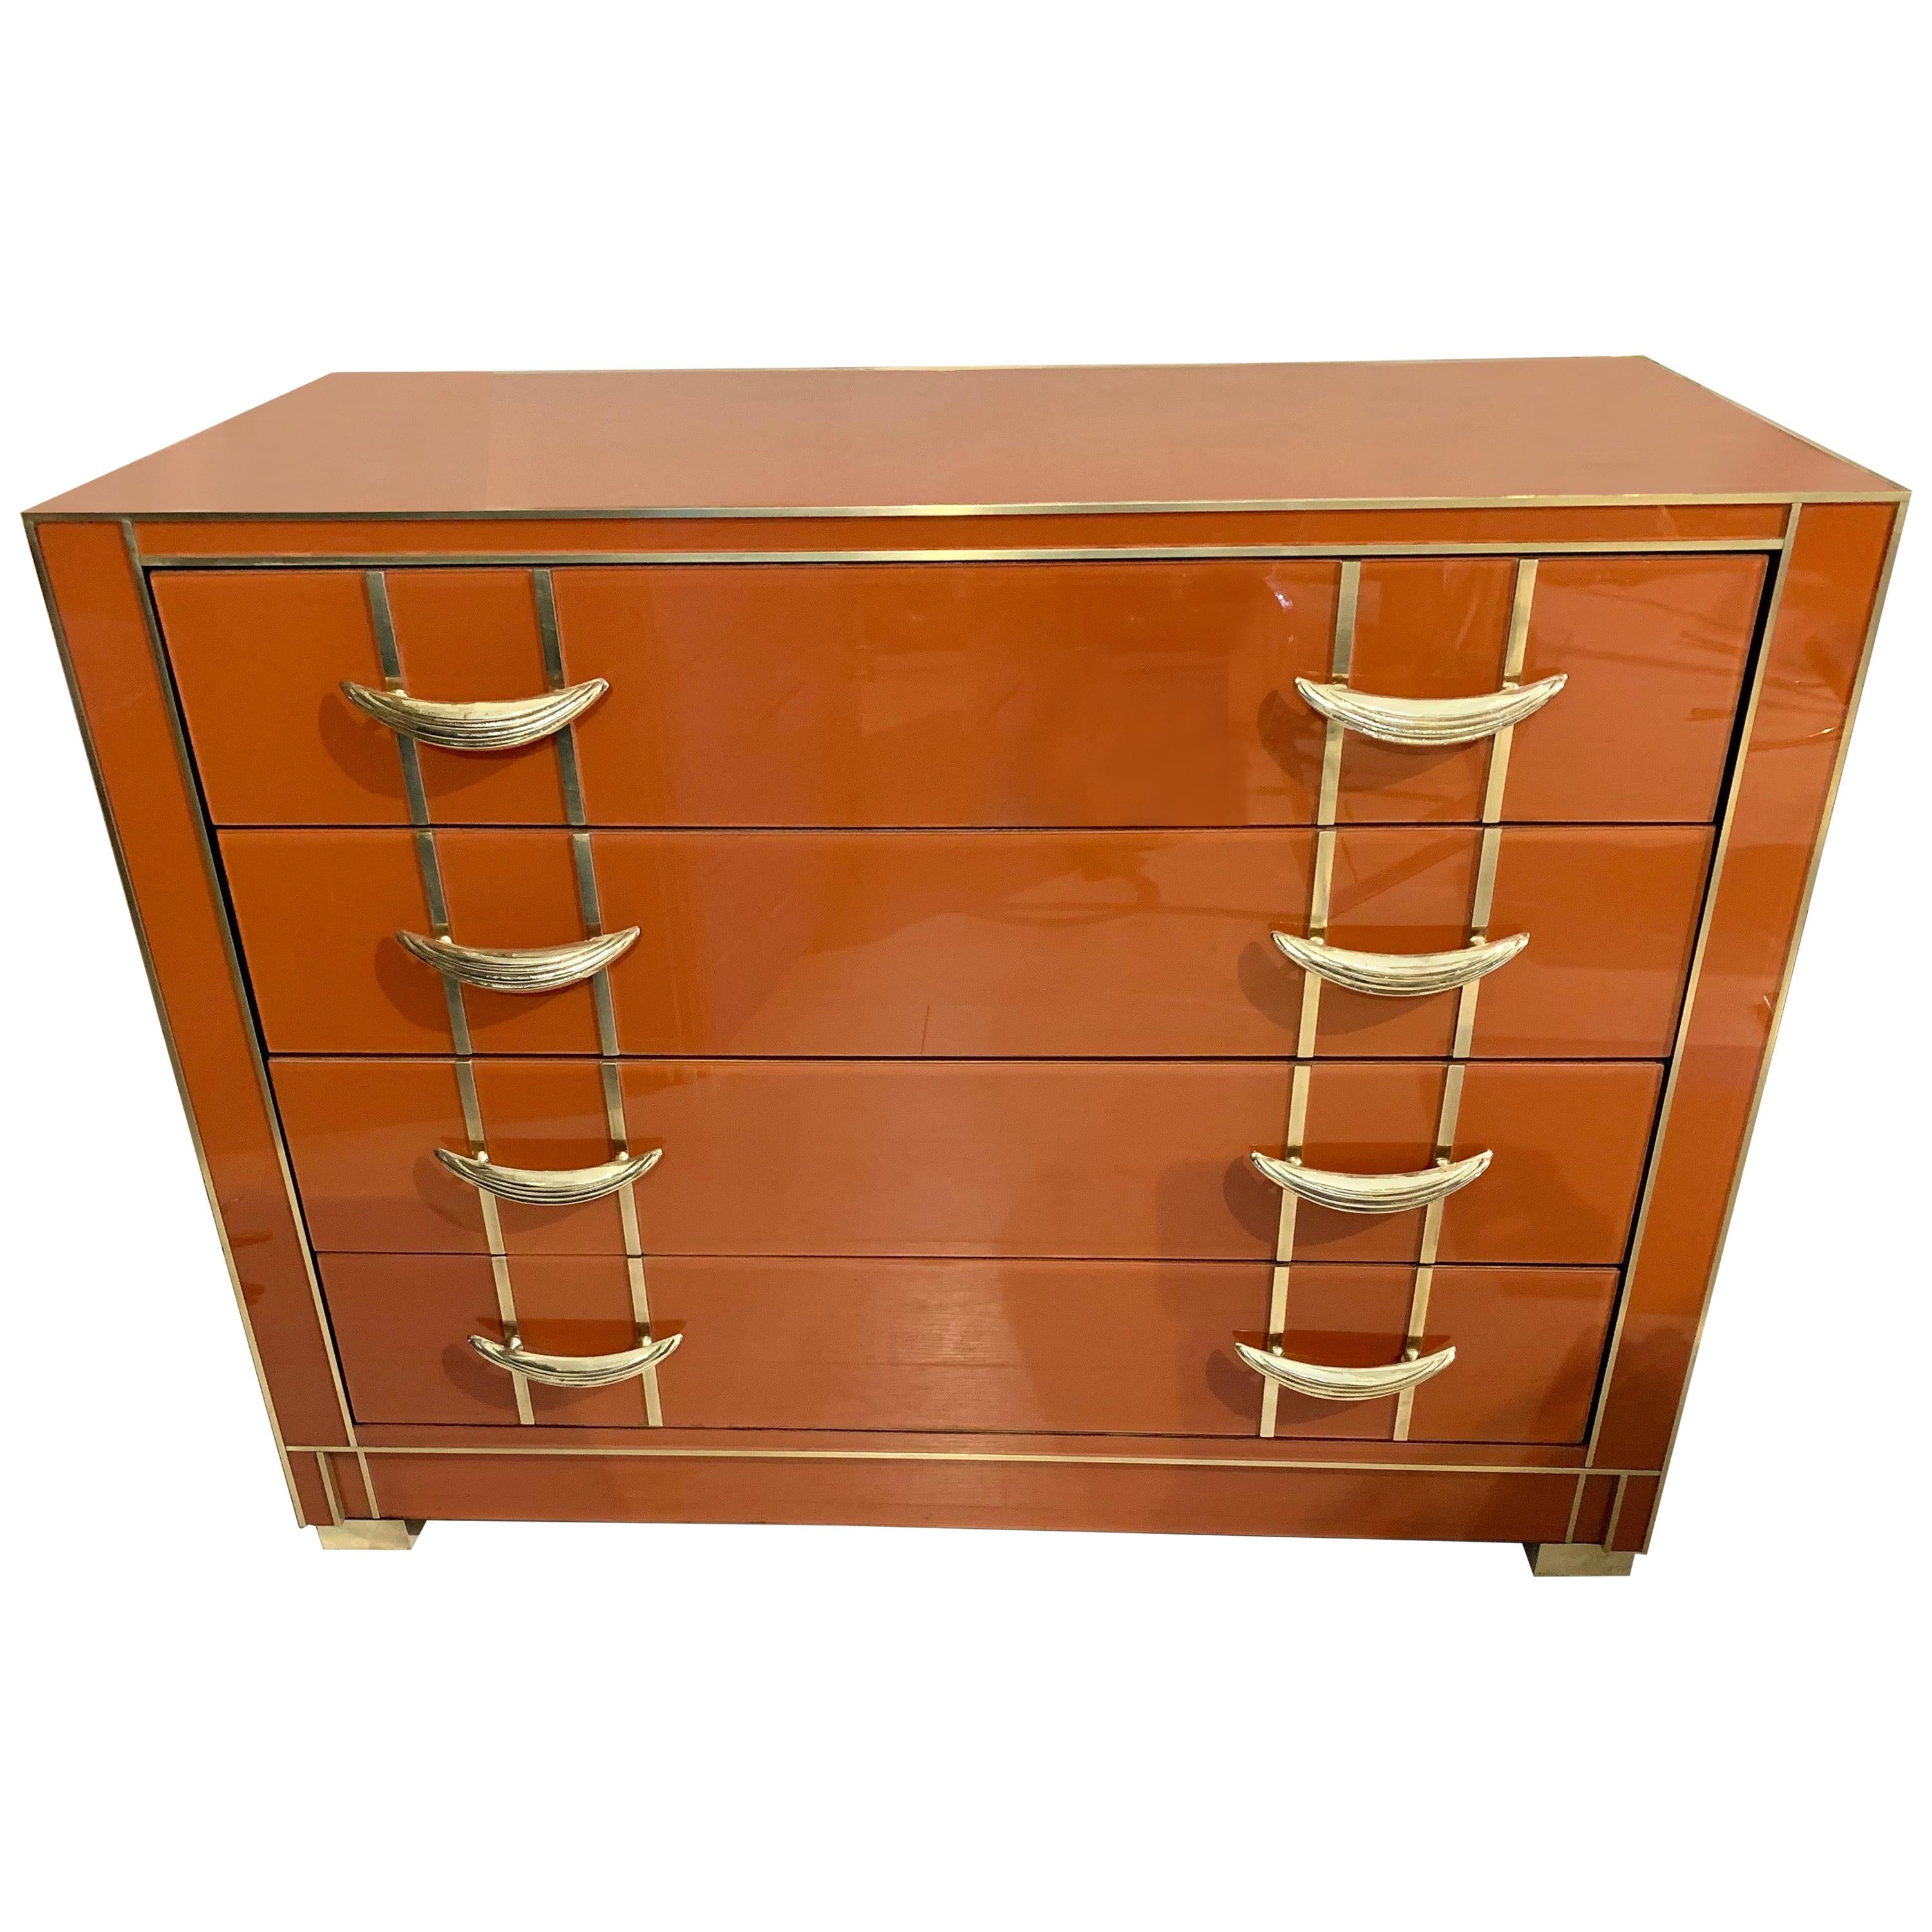 Italian Orange Opaline Glass Chest of Drawers with Brass Handles, 1980s For Sale